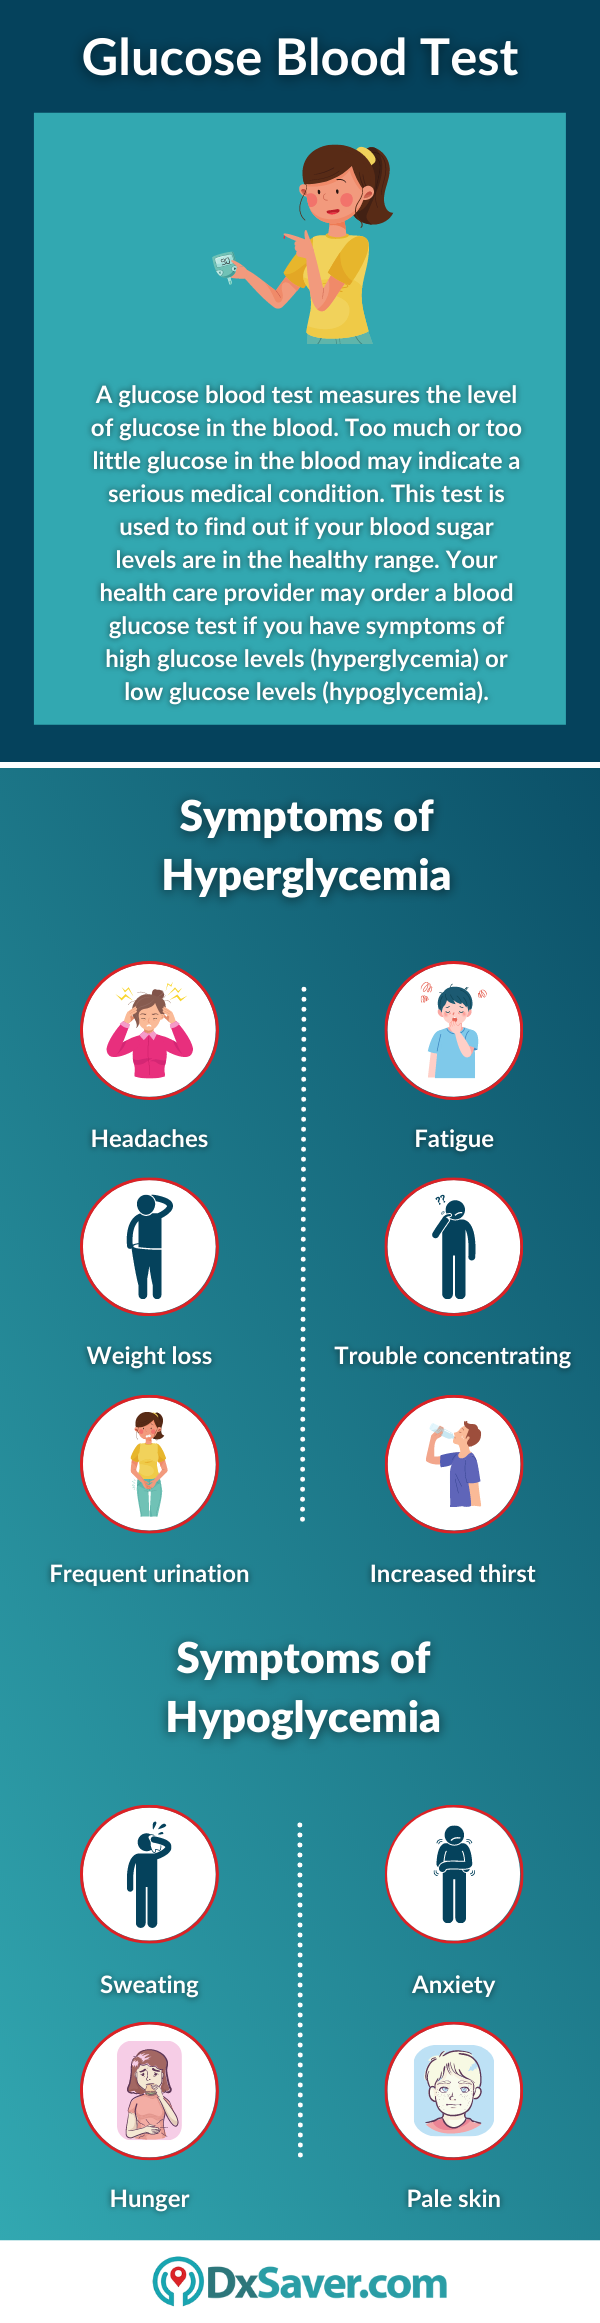 Glucose Blood Test and Symptoms of Hyperglycemia & Hypoglycemia